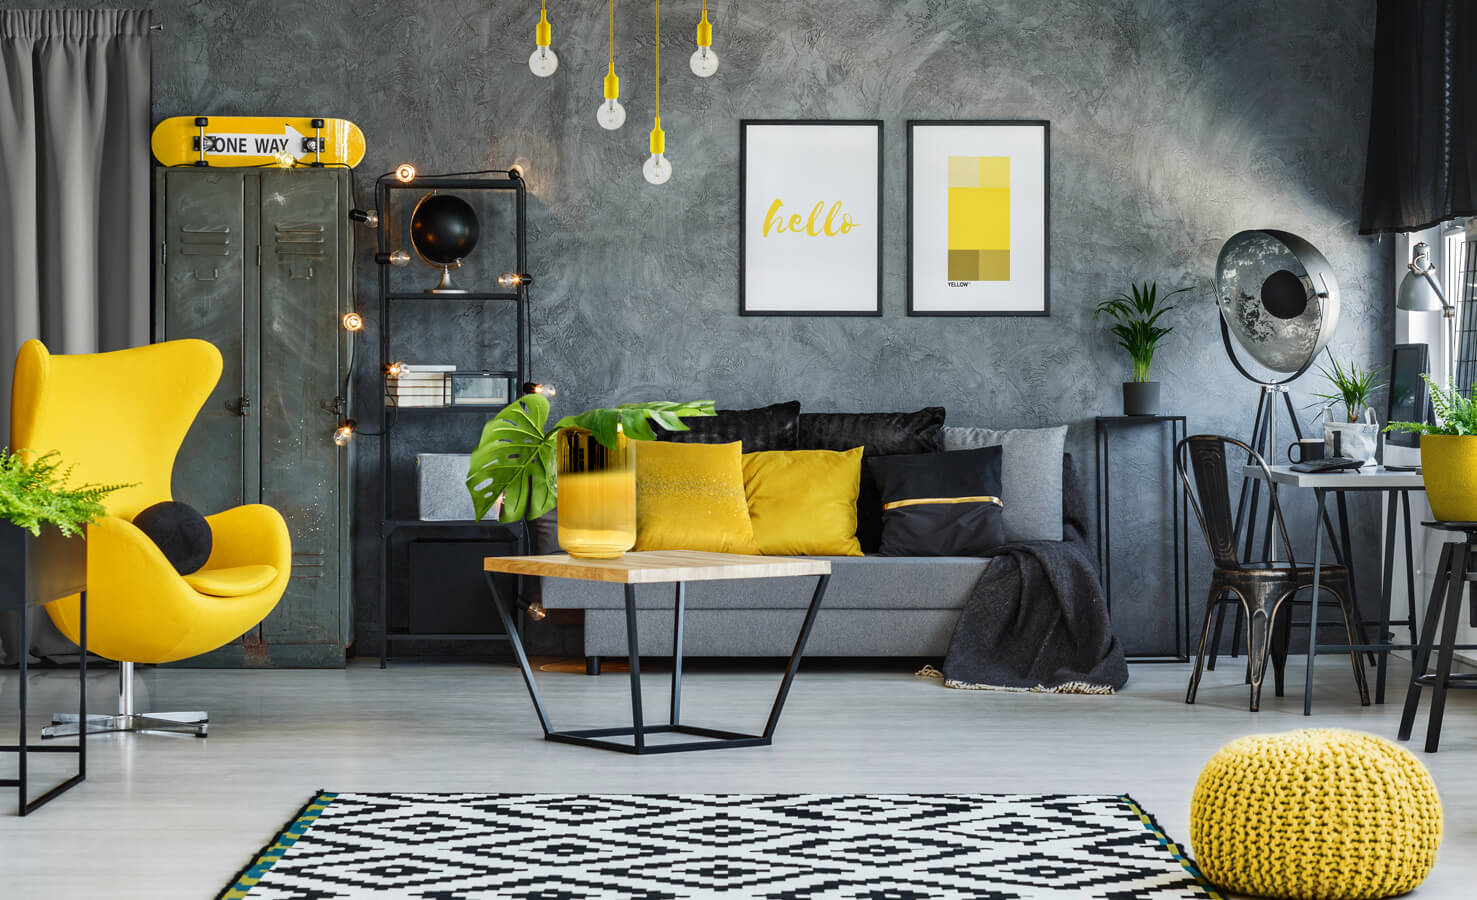 Trendy room colors - grey and yellow